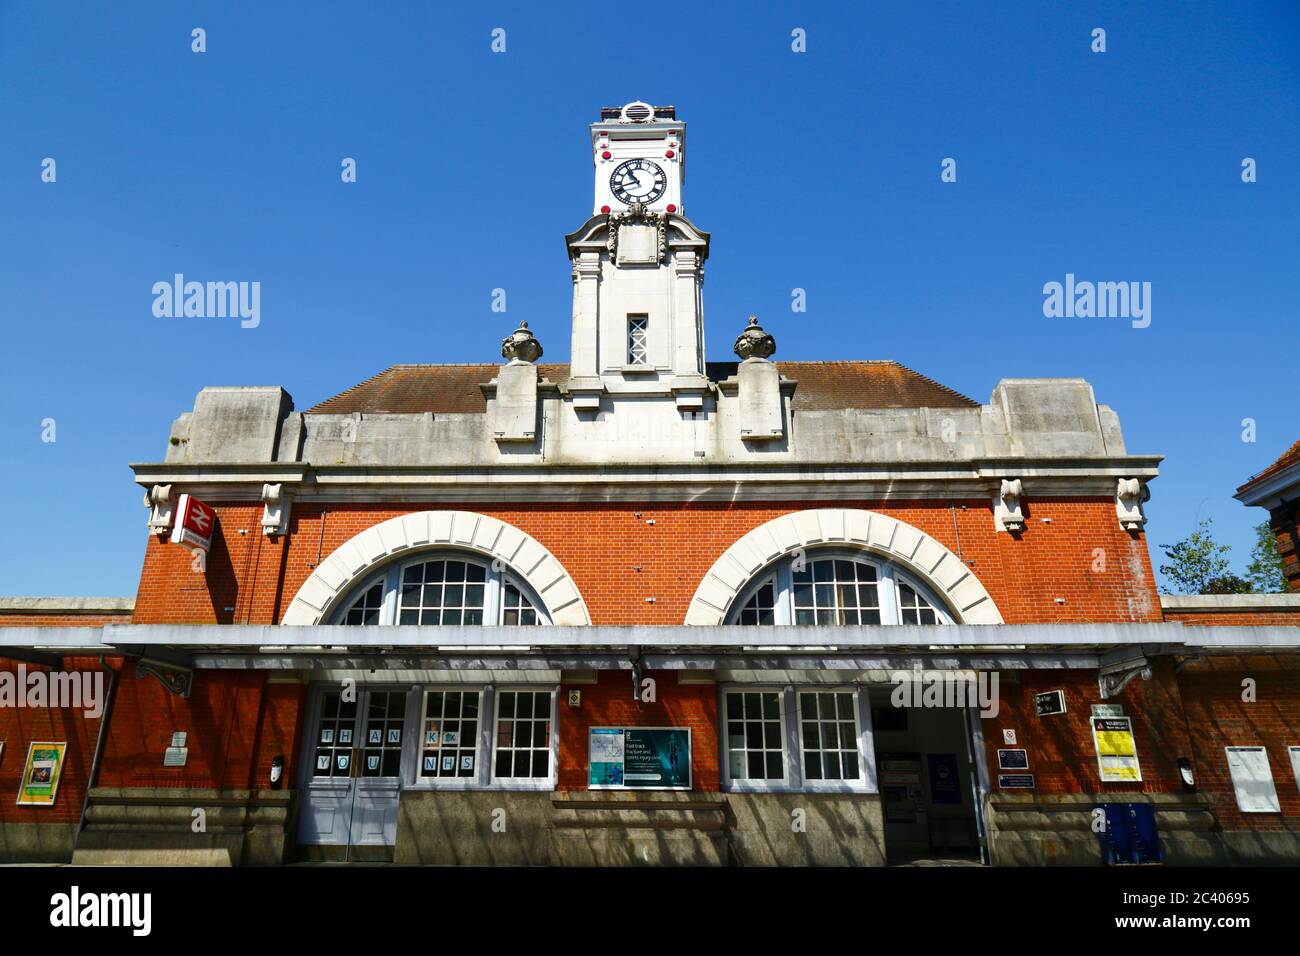 Clock tower and entrance facade of Central train station, Royal Tunbridge Wells, Kent, England Stock Photo